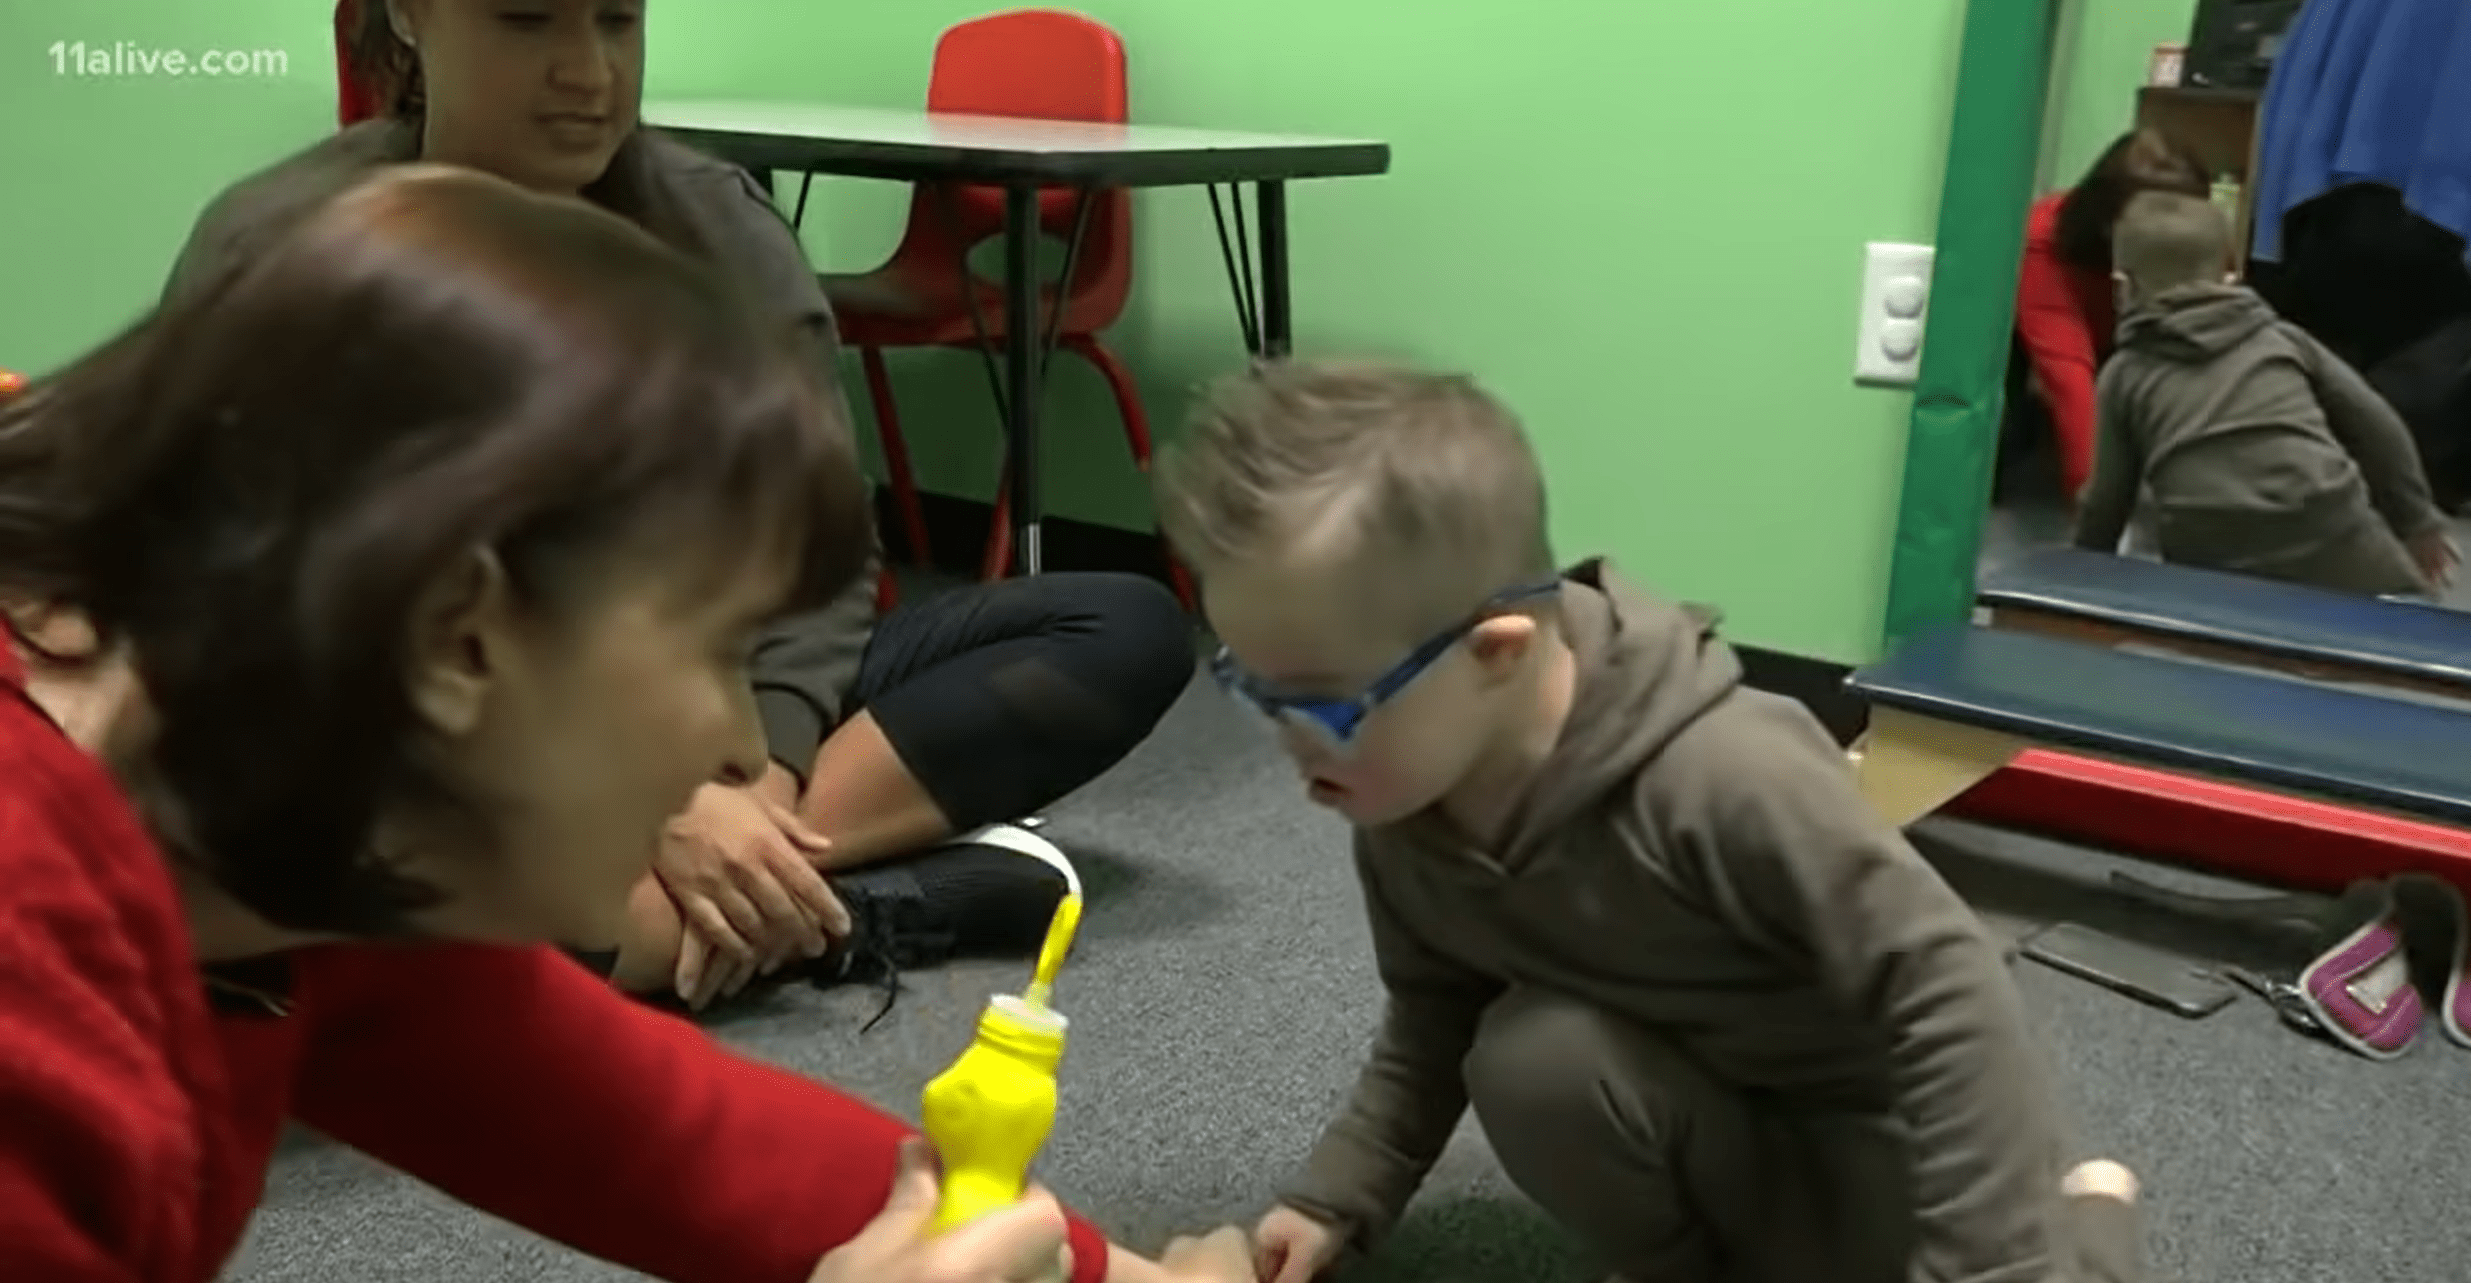 Special needs son playing with his mom. | Photo: YouTube/11Alive